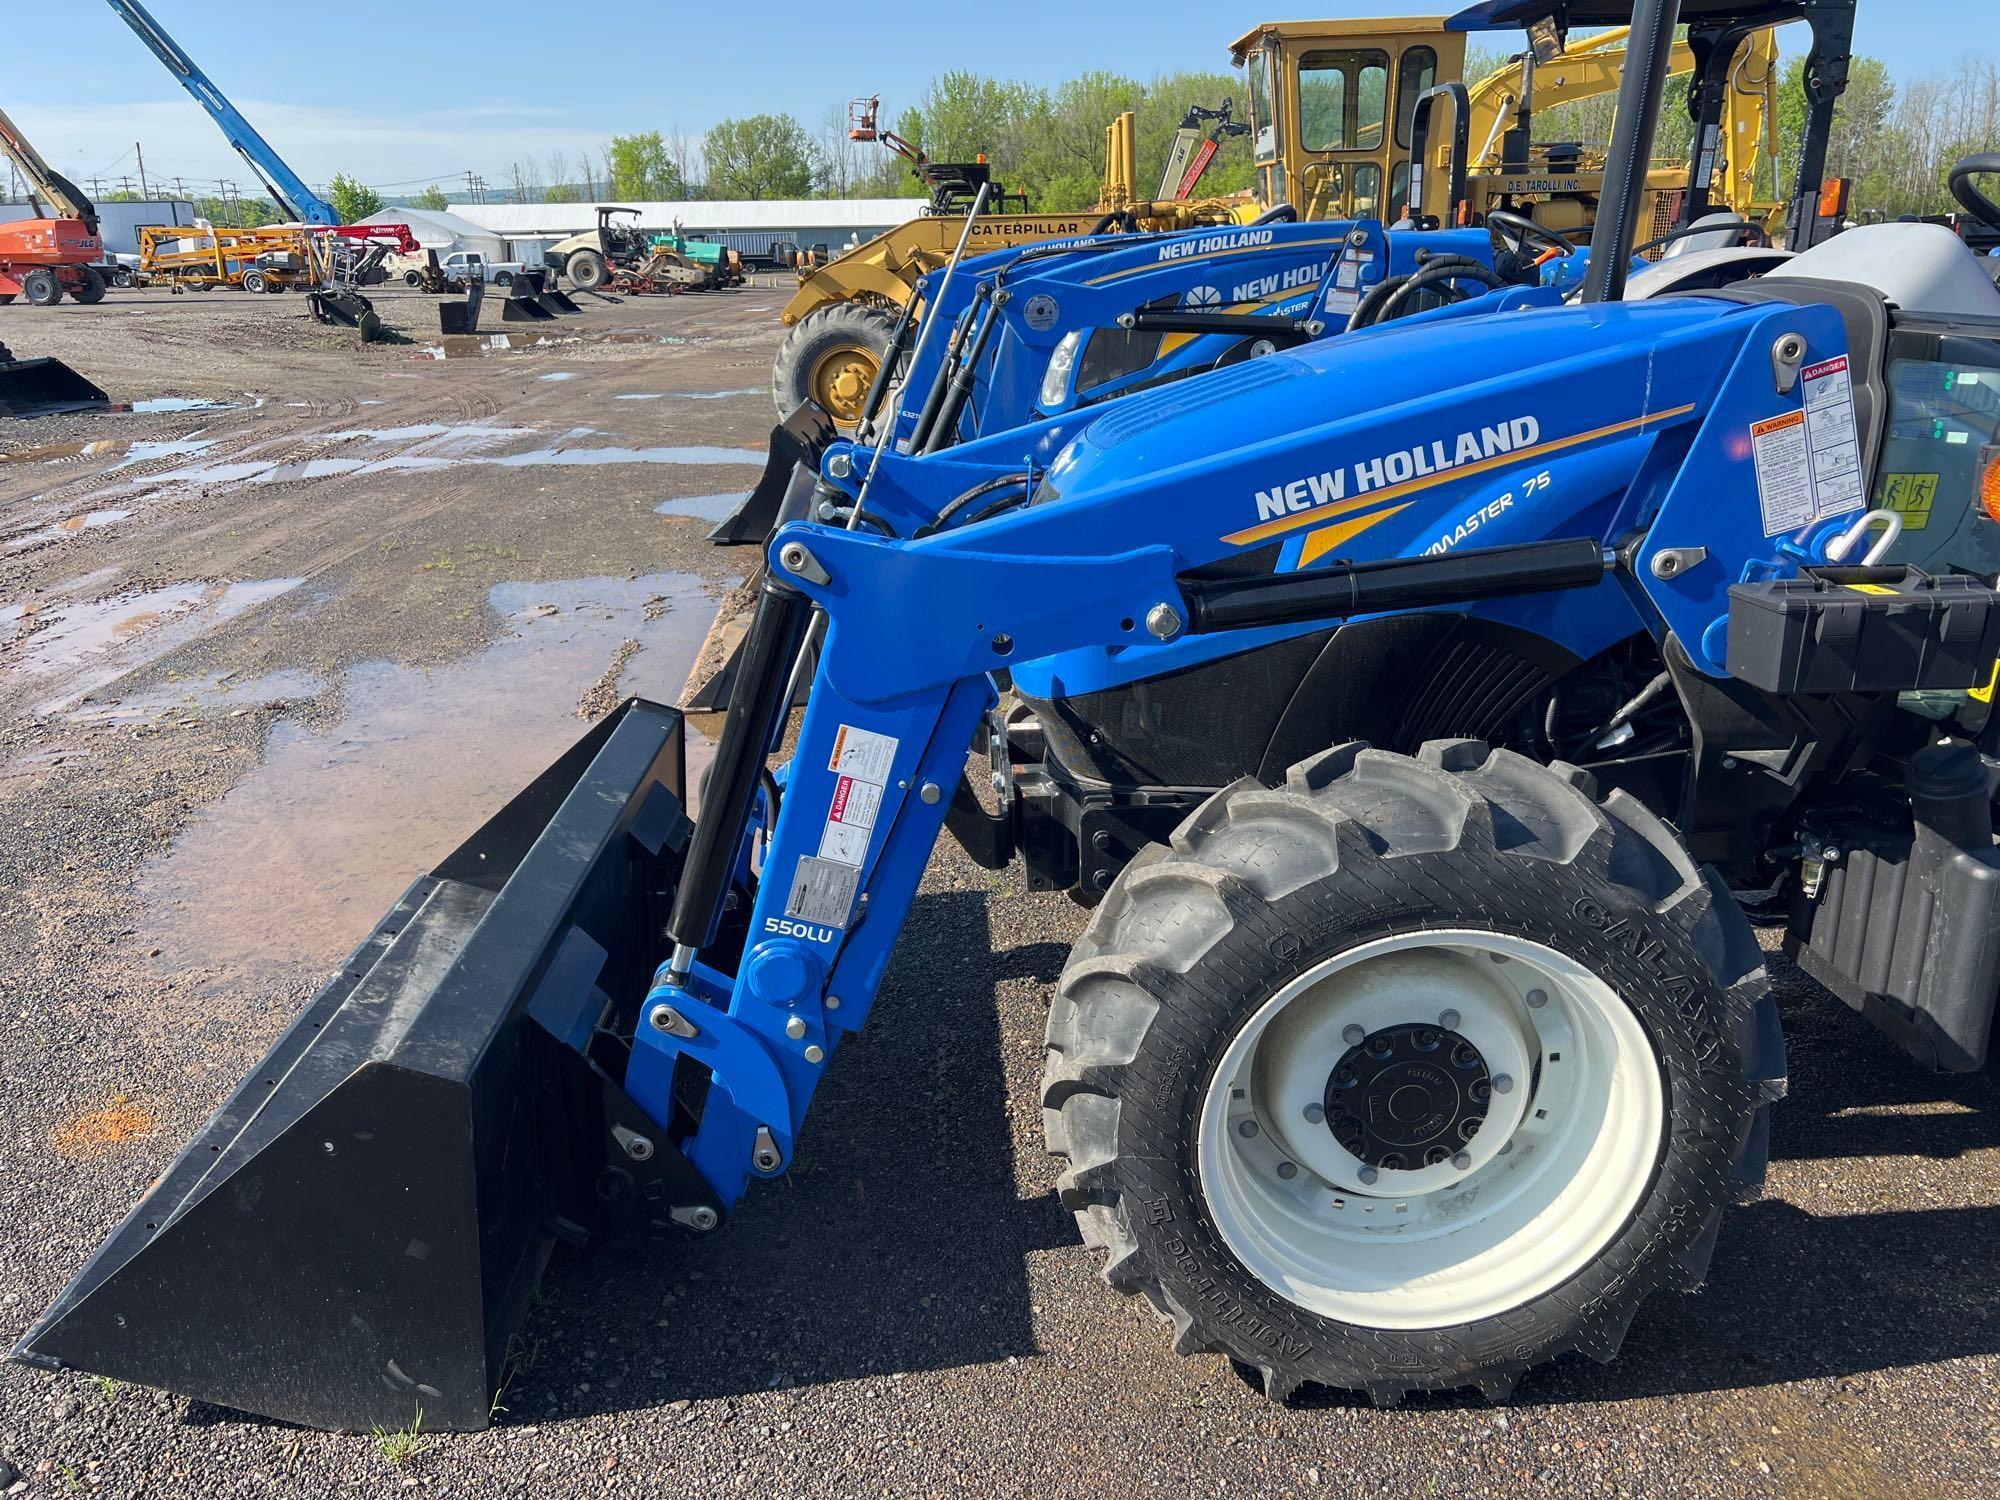 NEW NEW HOLLAND WORKMASTER 75 TRACTOR LOADER SN:04933...4x4, powered by diesel engine, 75hp, equippe